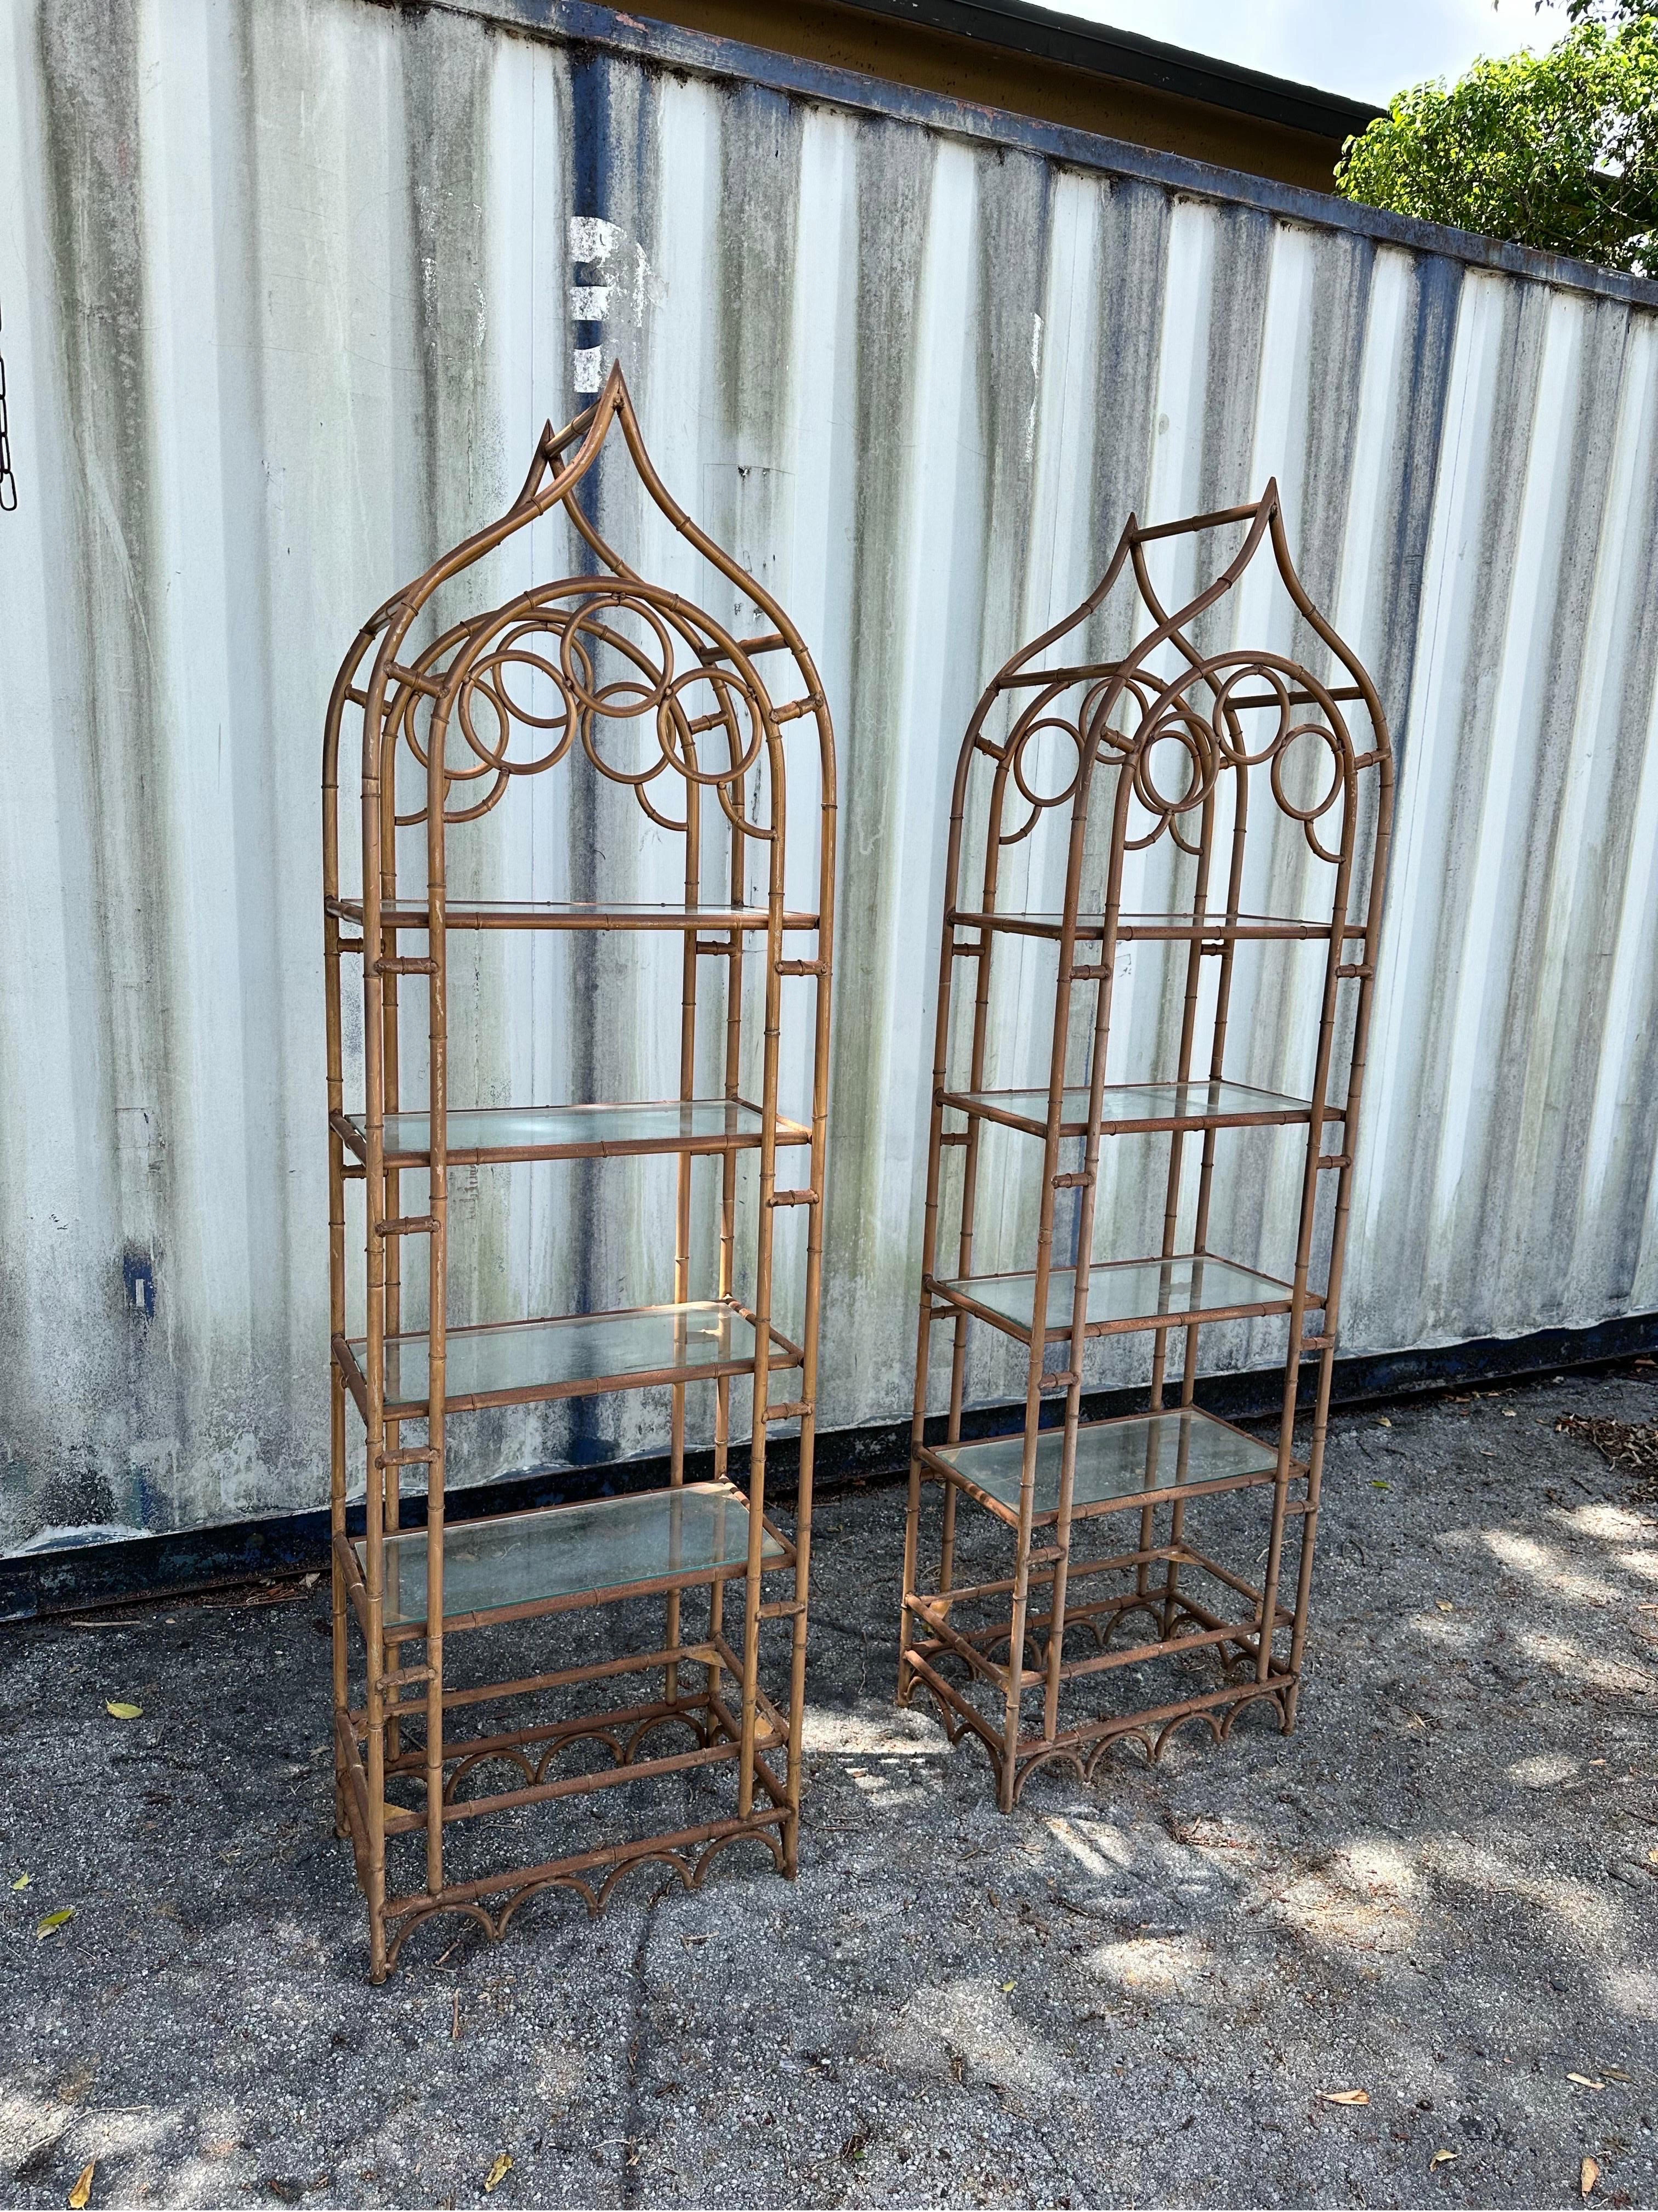 Pair of Pagoda bamboo shape bookshelves.
6 glass shelves.
Distressed look , sturdy and stable .
